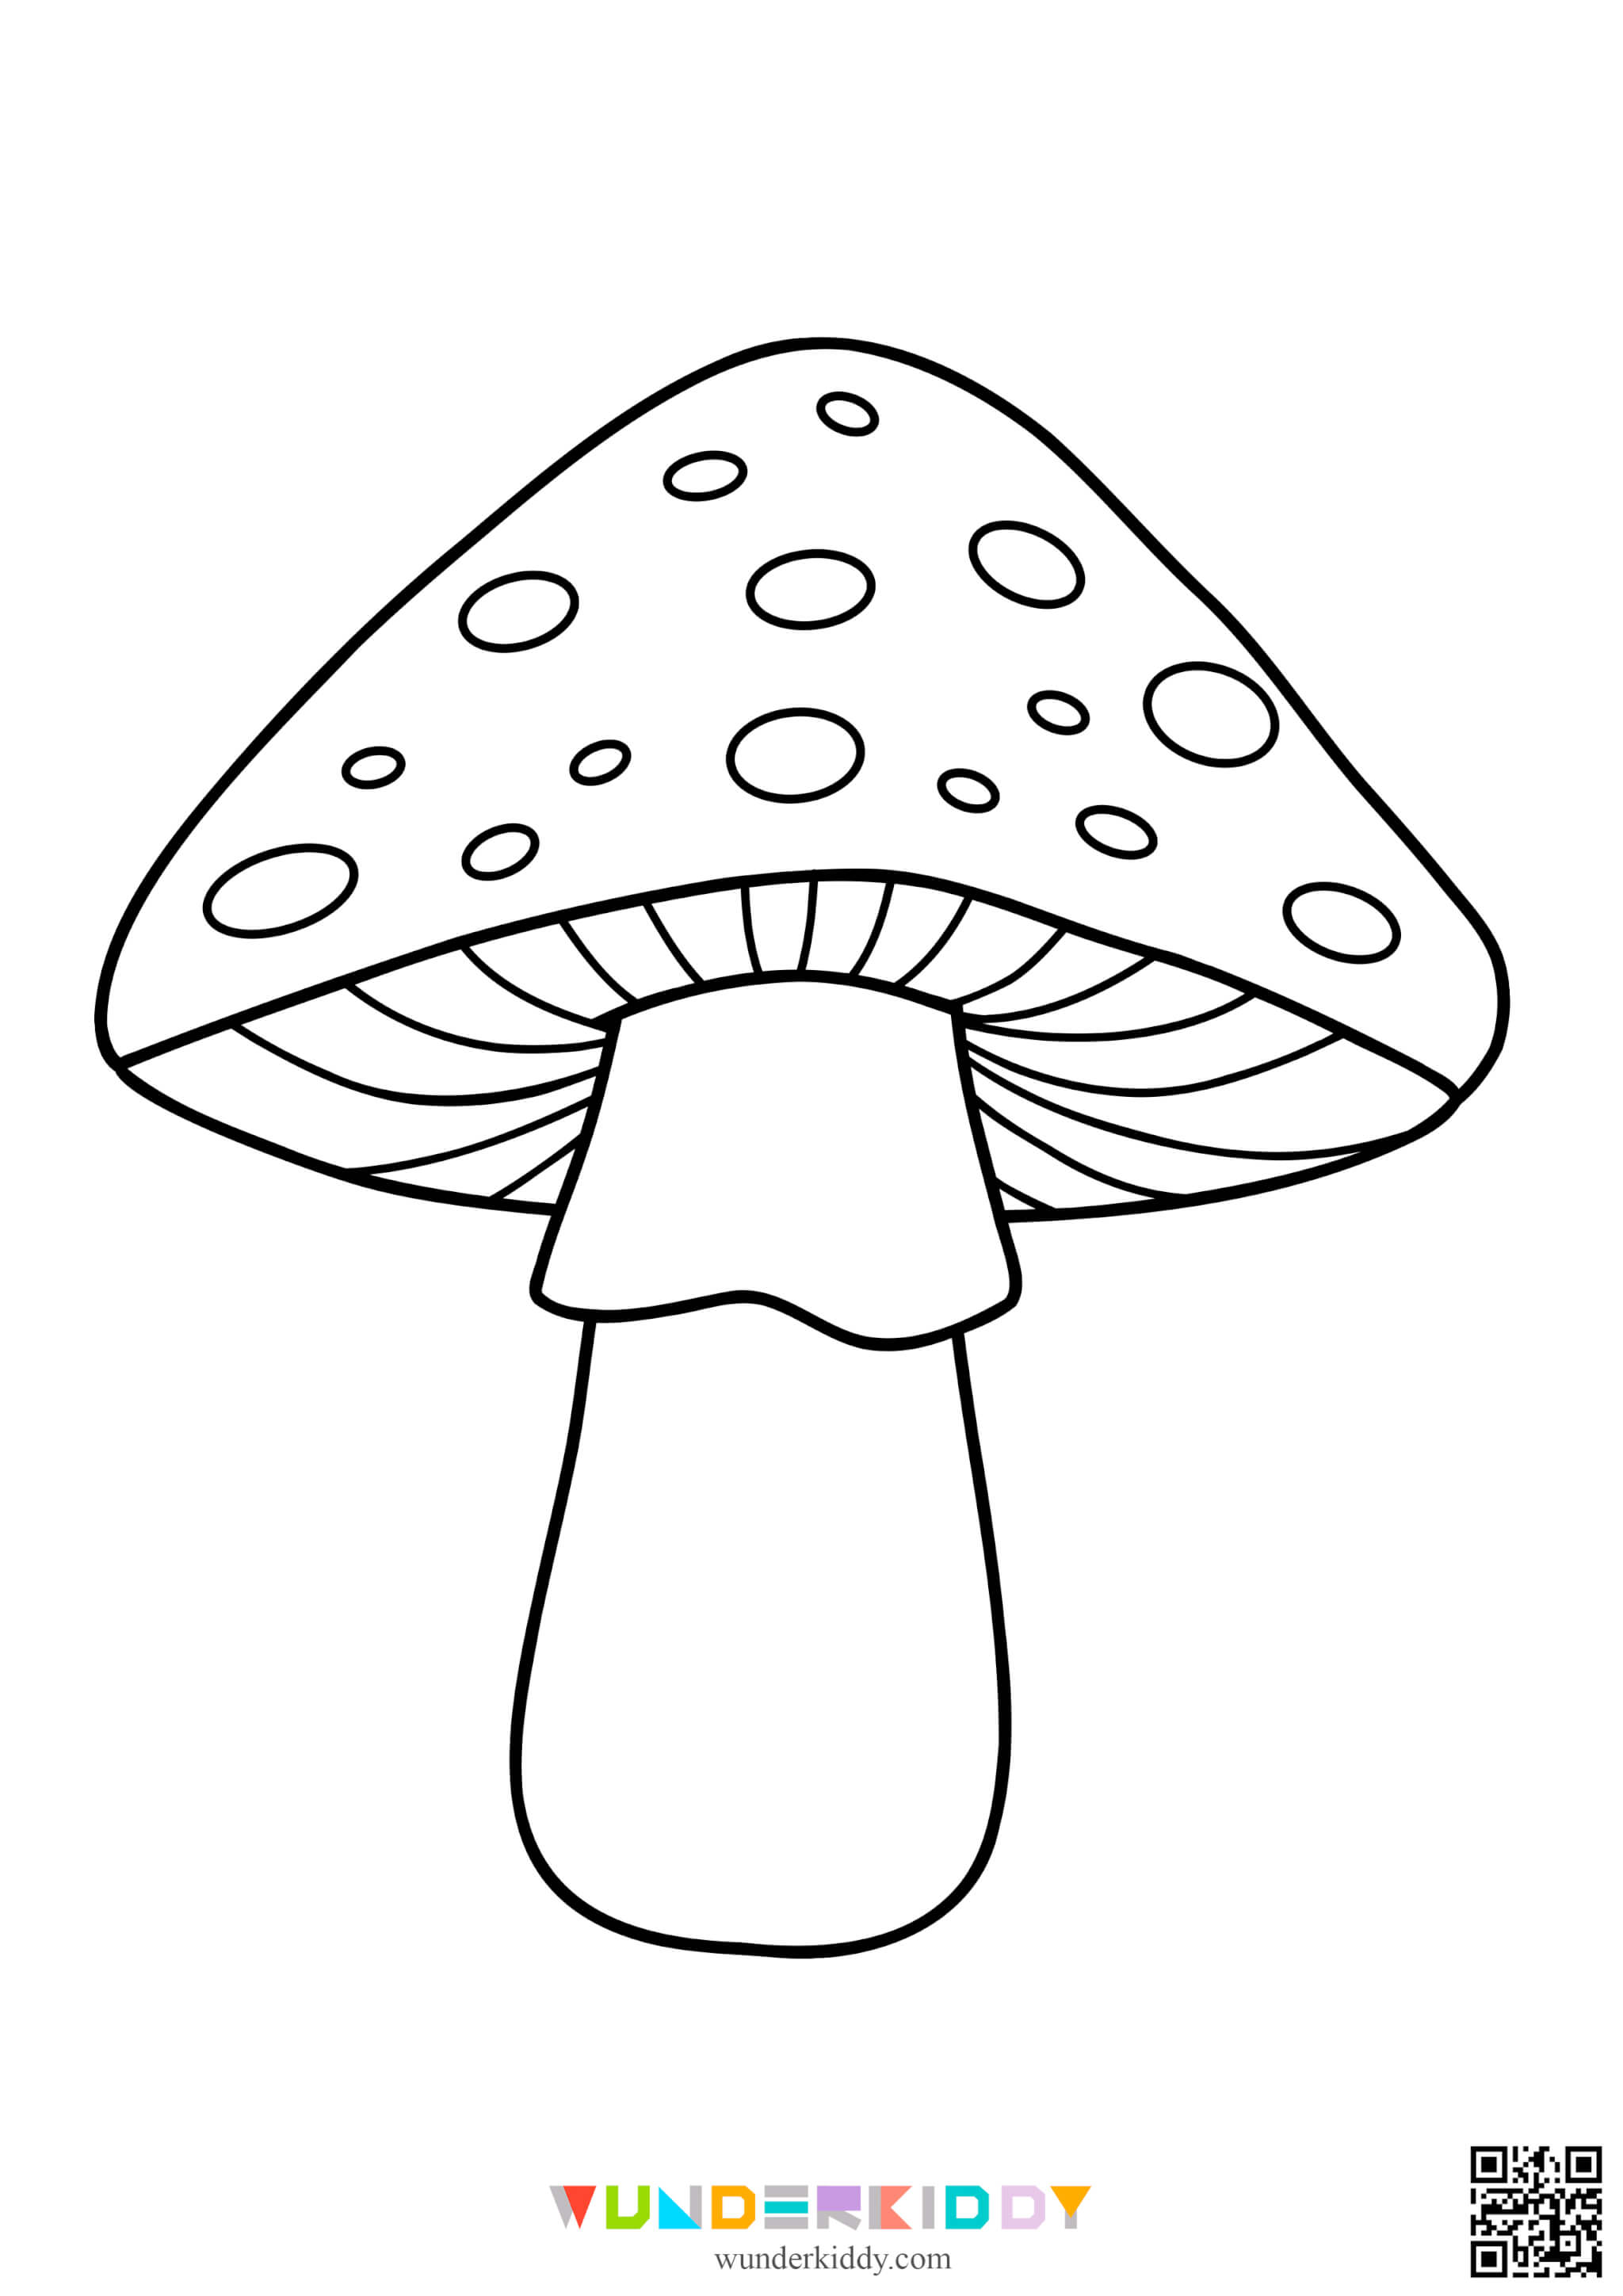 Fall Coloring Pages - Image 18